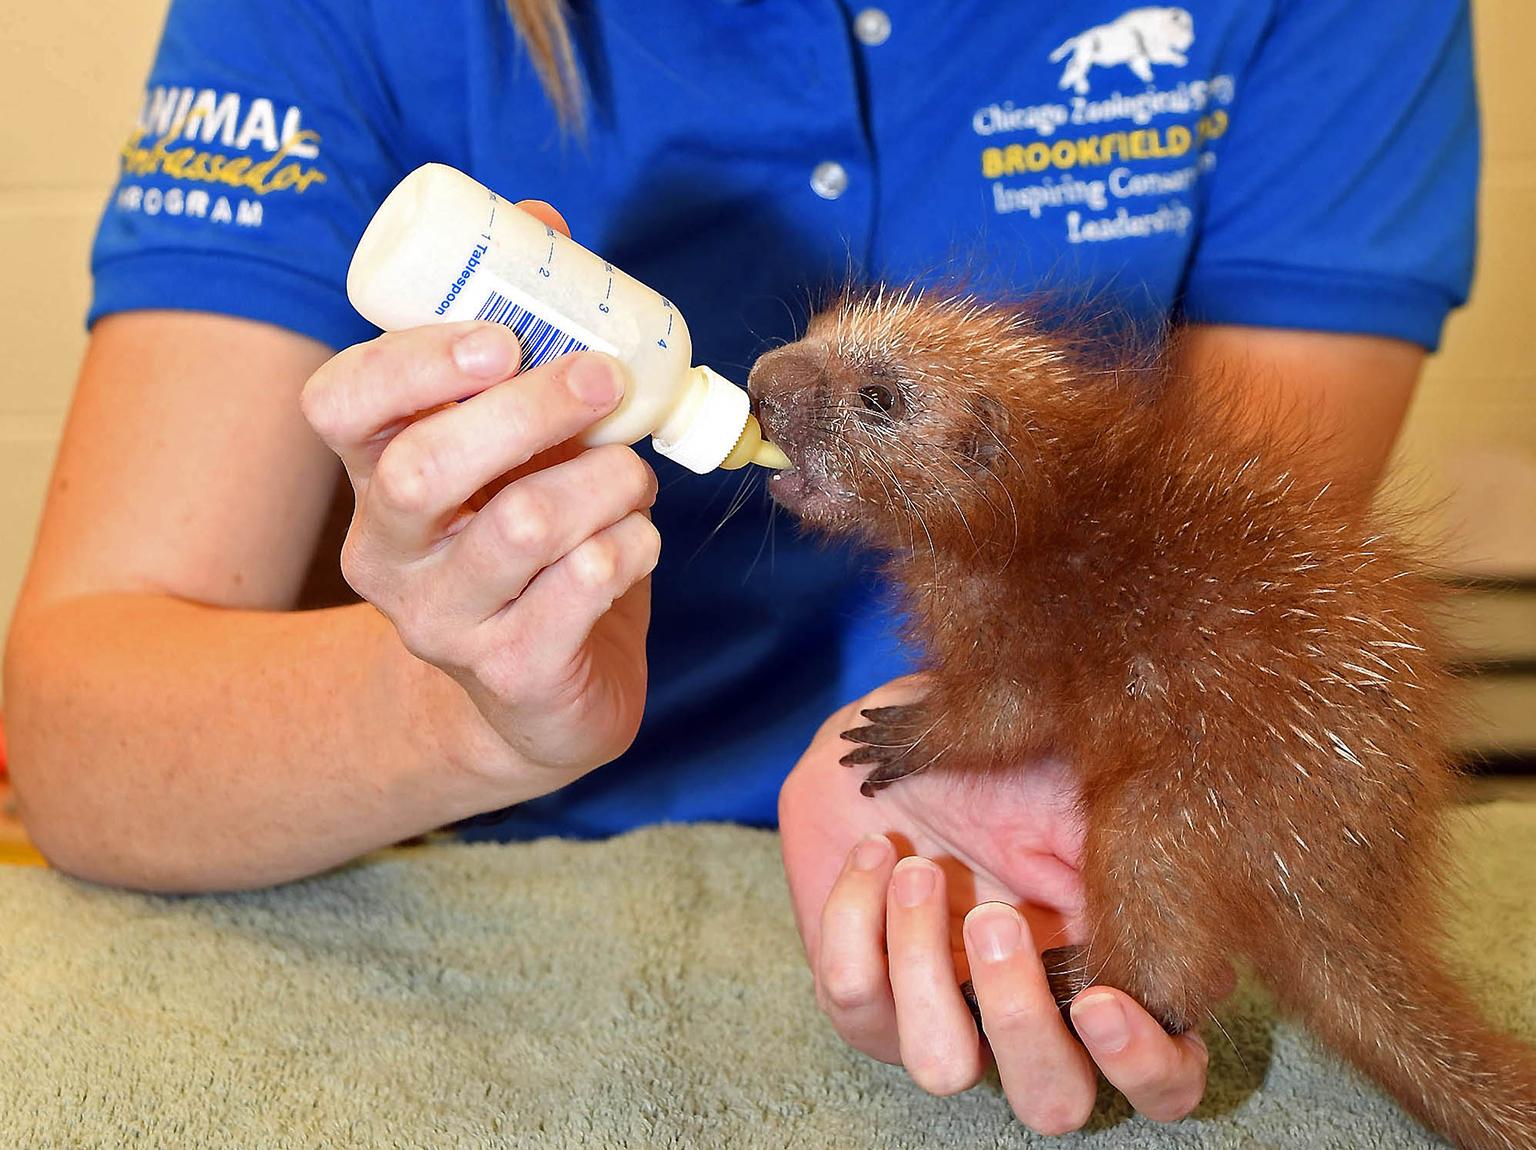 A baby prehensile-tailed porcupine was born at Brookfield Zoo last month. The porcupine is being hand-reared by the zoo's animal care staff. (Jim Schulz / Chicago Zoological Society)